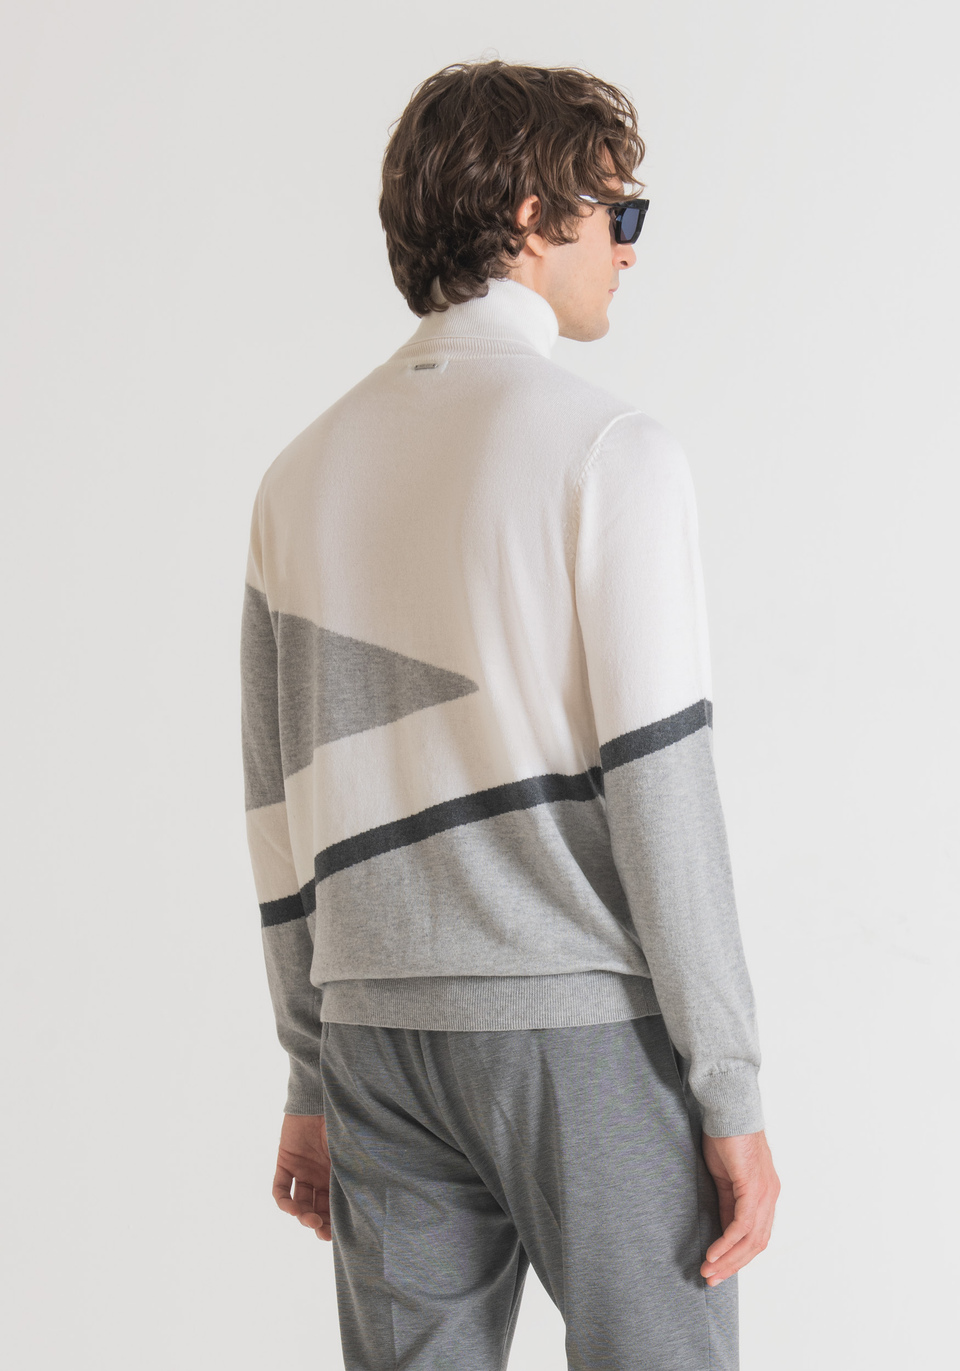 HIGH-NECK SWEATER IN MERINO WOOL BLEND WITH JACQUARD PATTERN - Antony Morato Online Shop